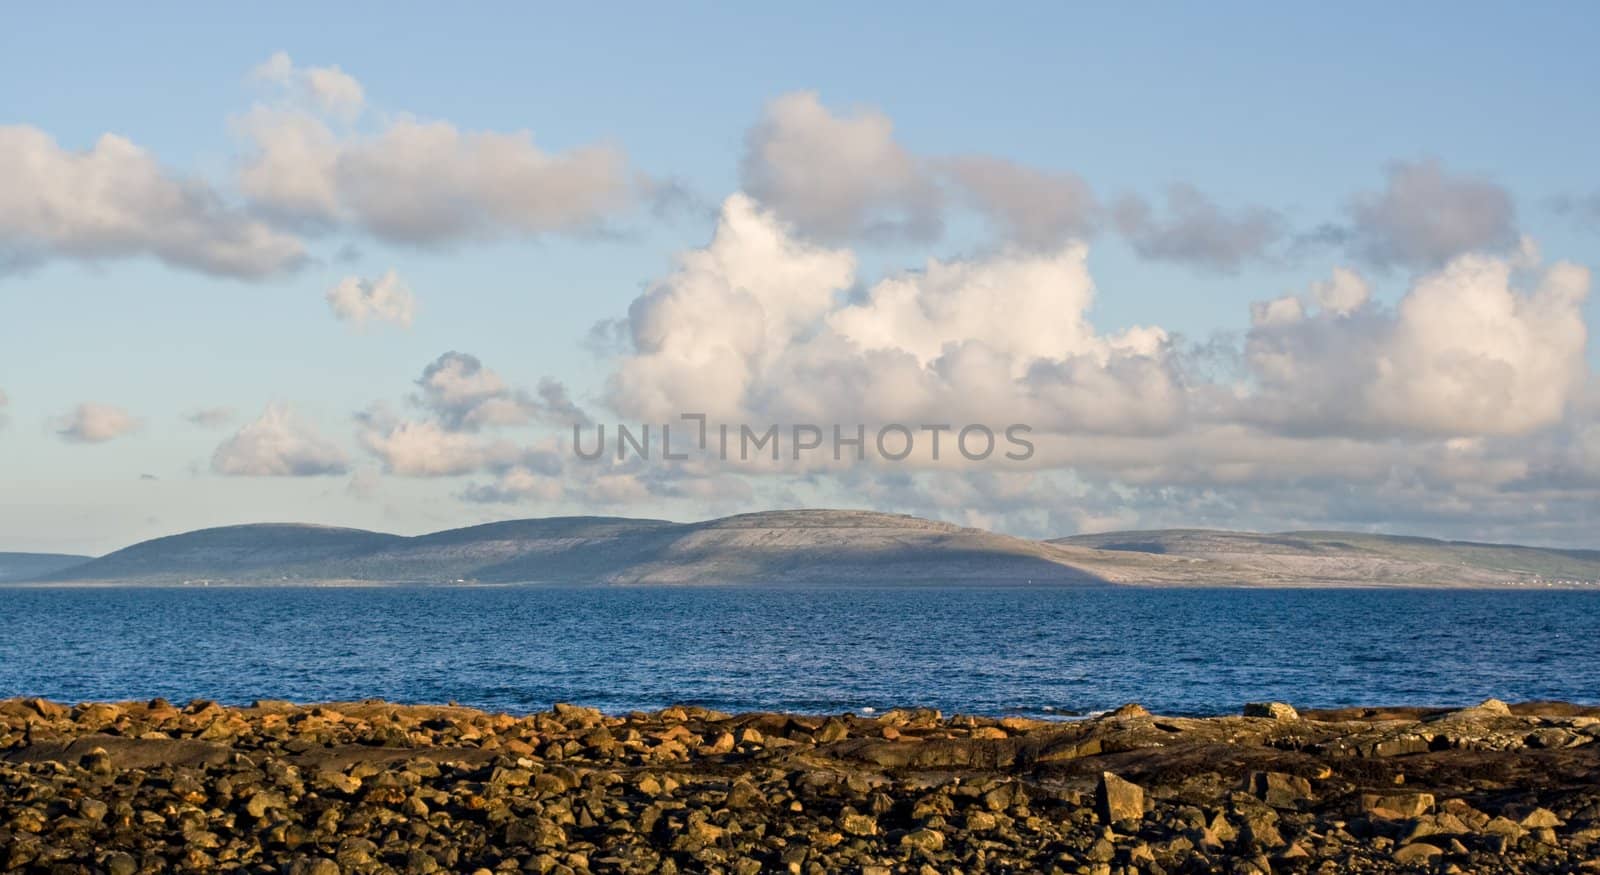 Galway Bay in Ireland from the town of Spiddal with The Burren across the bay. Photo is layered from front to back with Rocks, Galway Bay, The Burren, and sky.